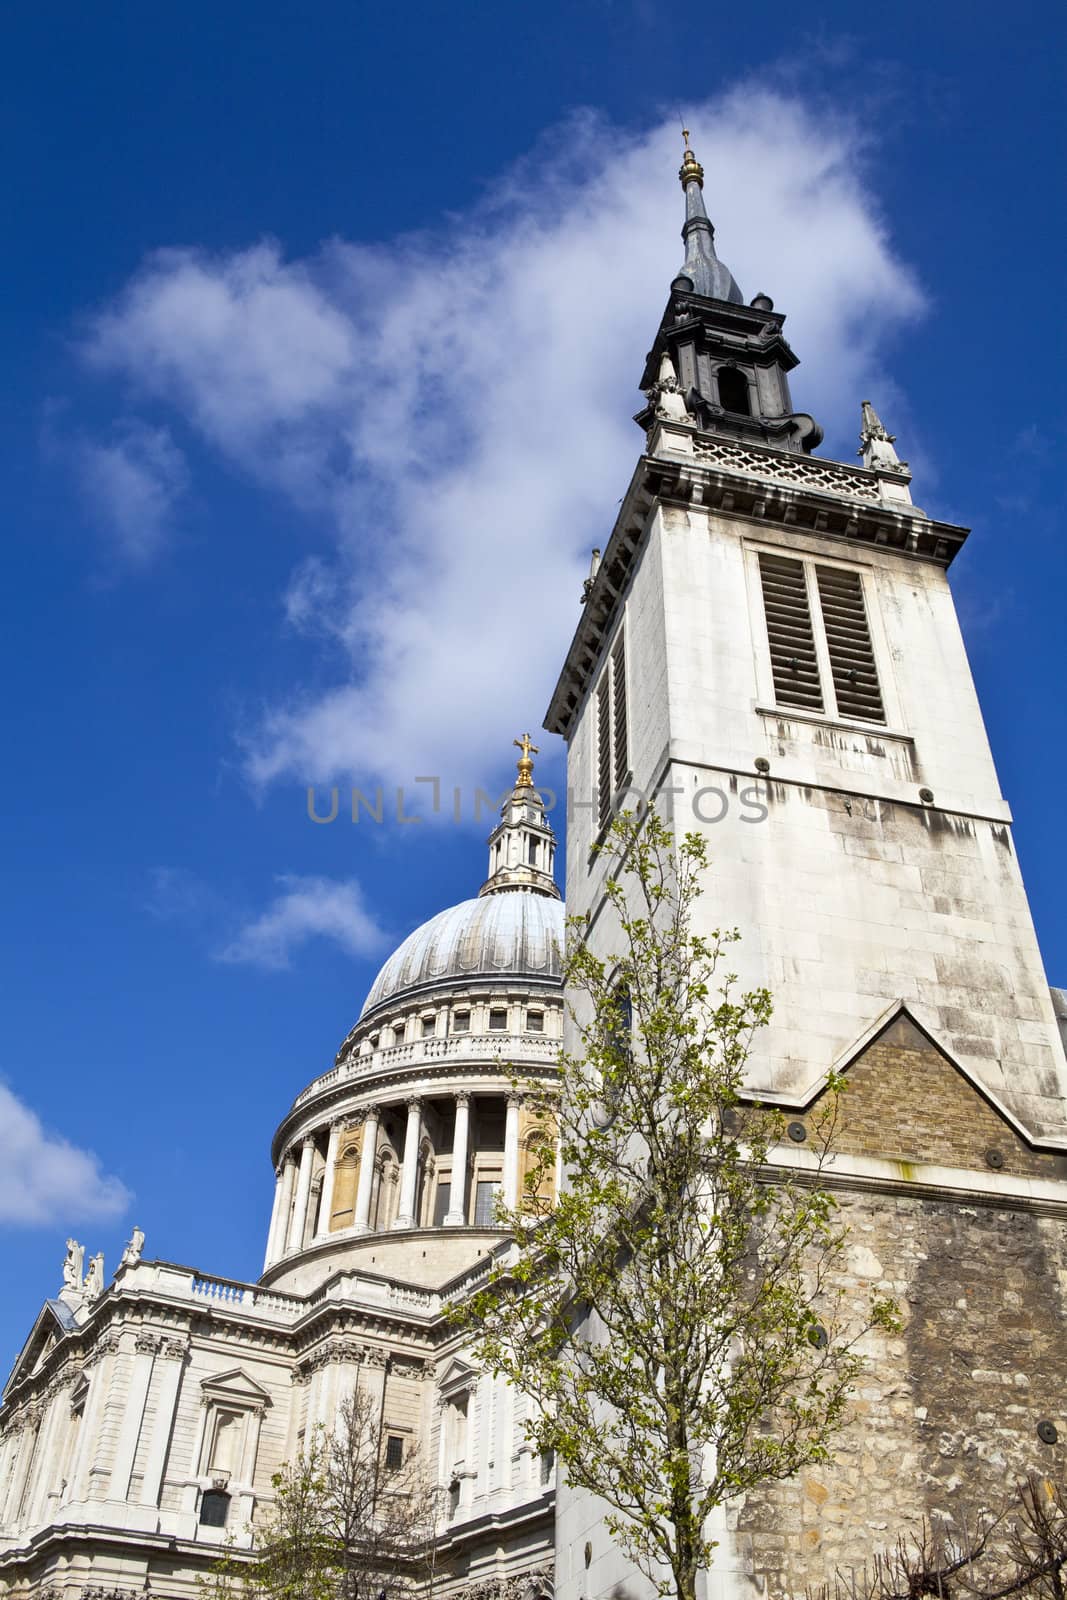 The Tower of the Former St. Augustine Church and St. Paul's Cath by chrisdorney